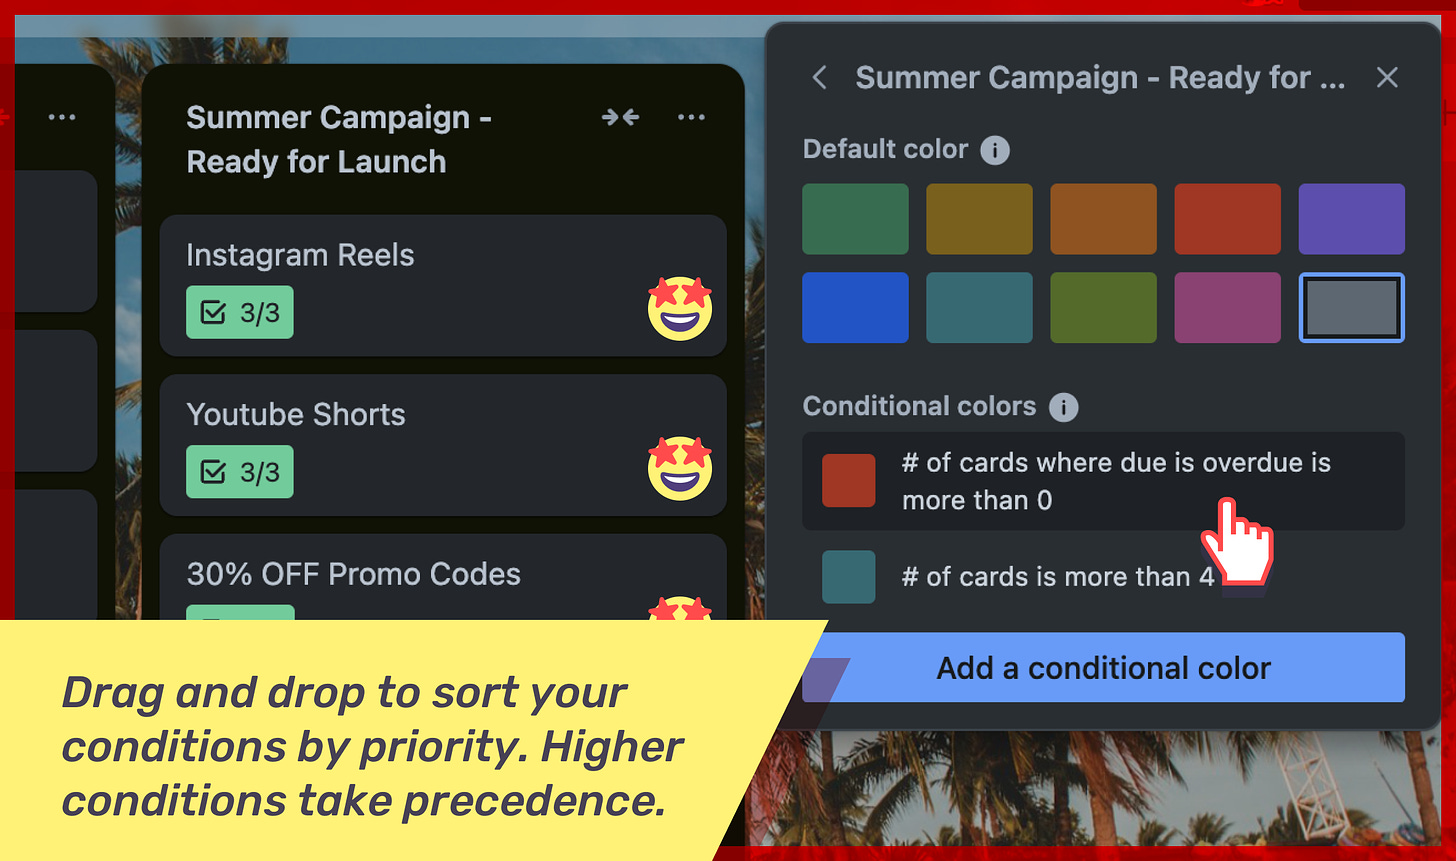 Drag and drop to sort your conditions by priority